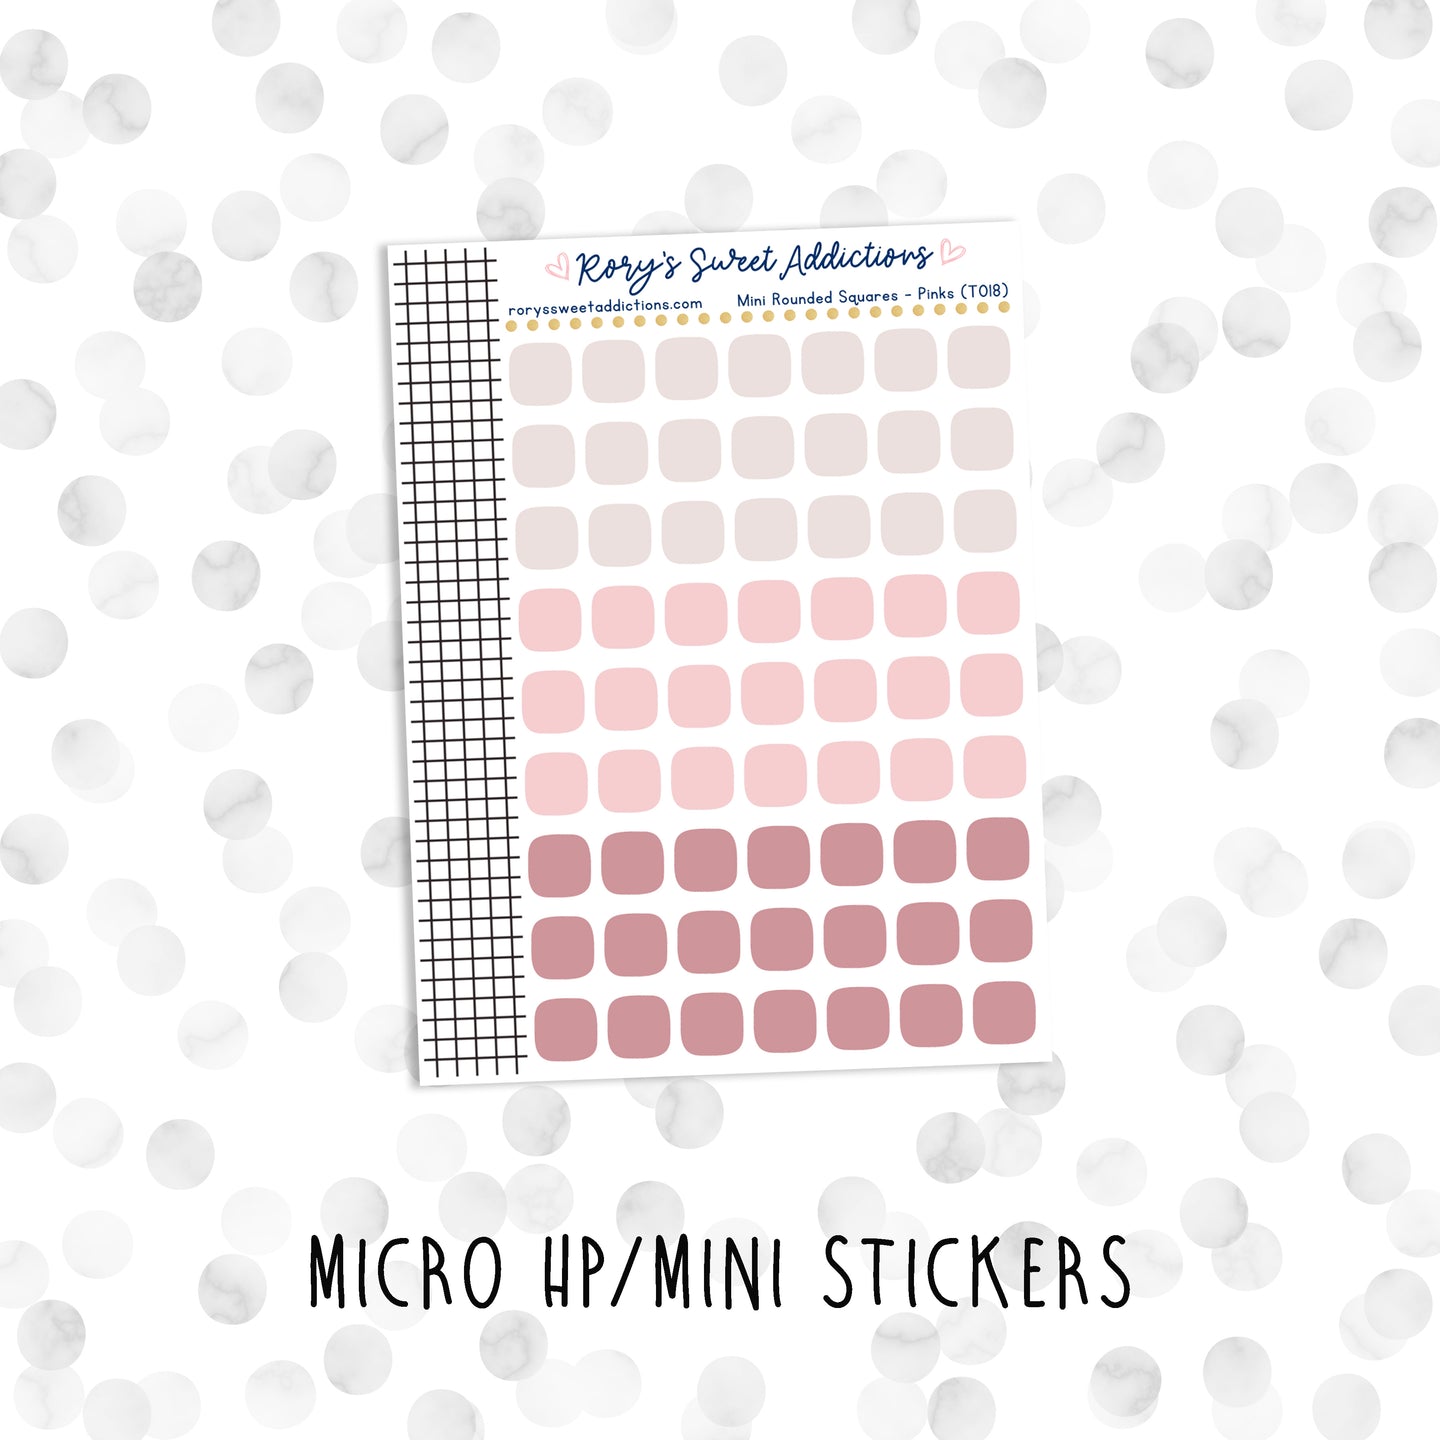 Mini Rounded Squares - Pinks // Micro HP - Mini Stickers